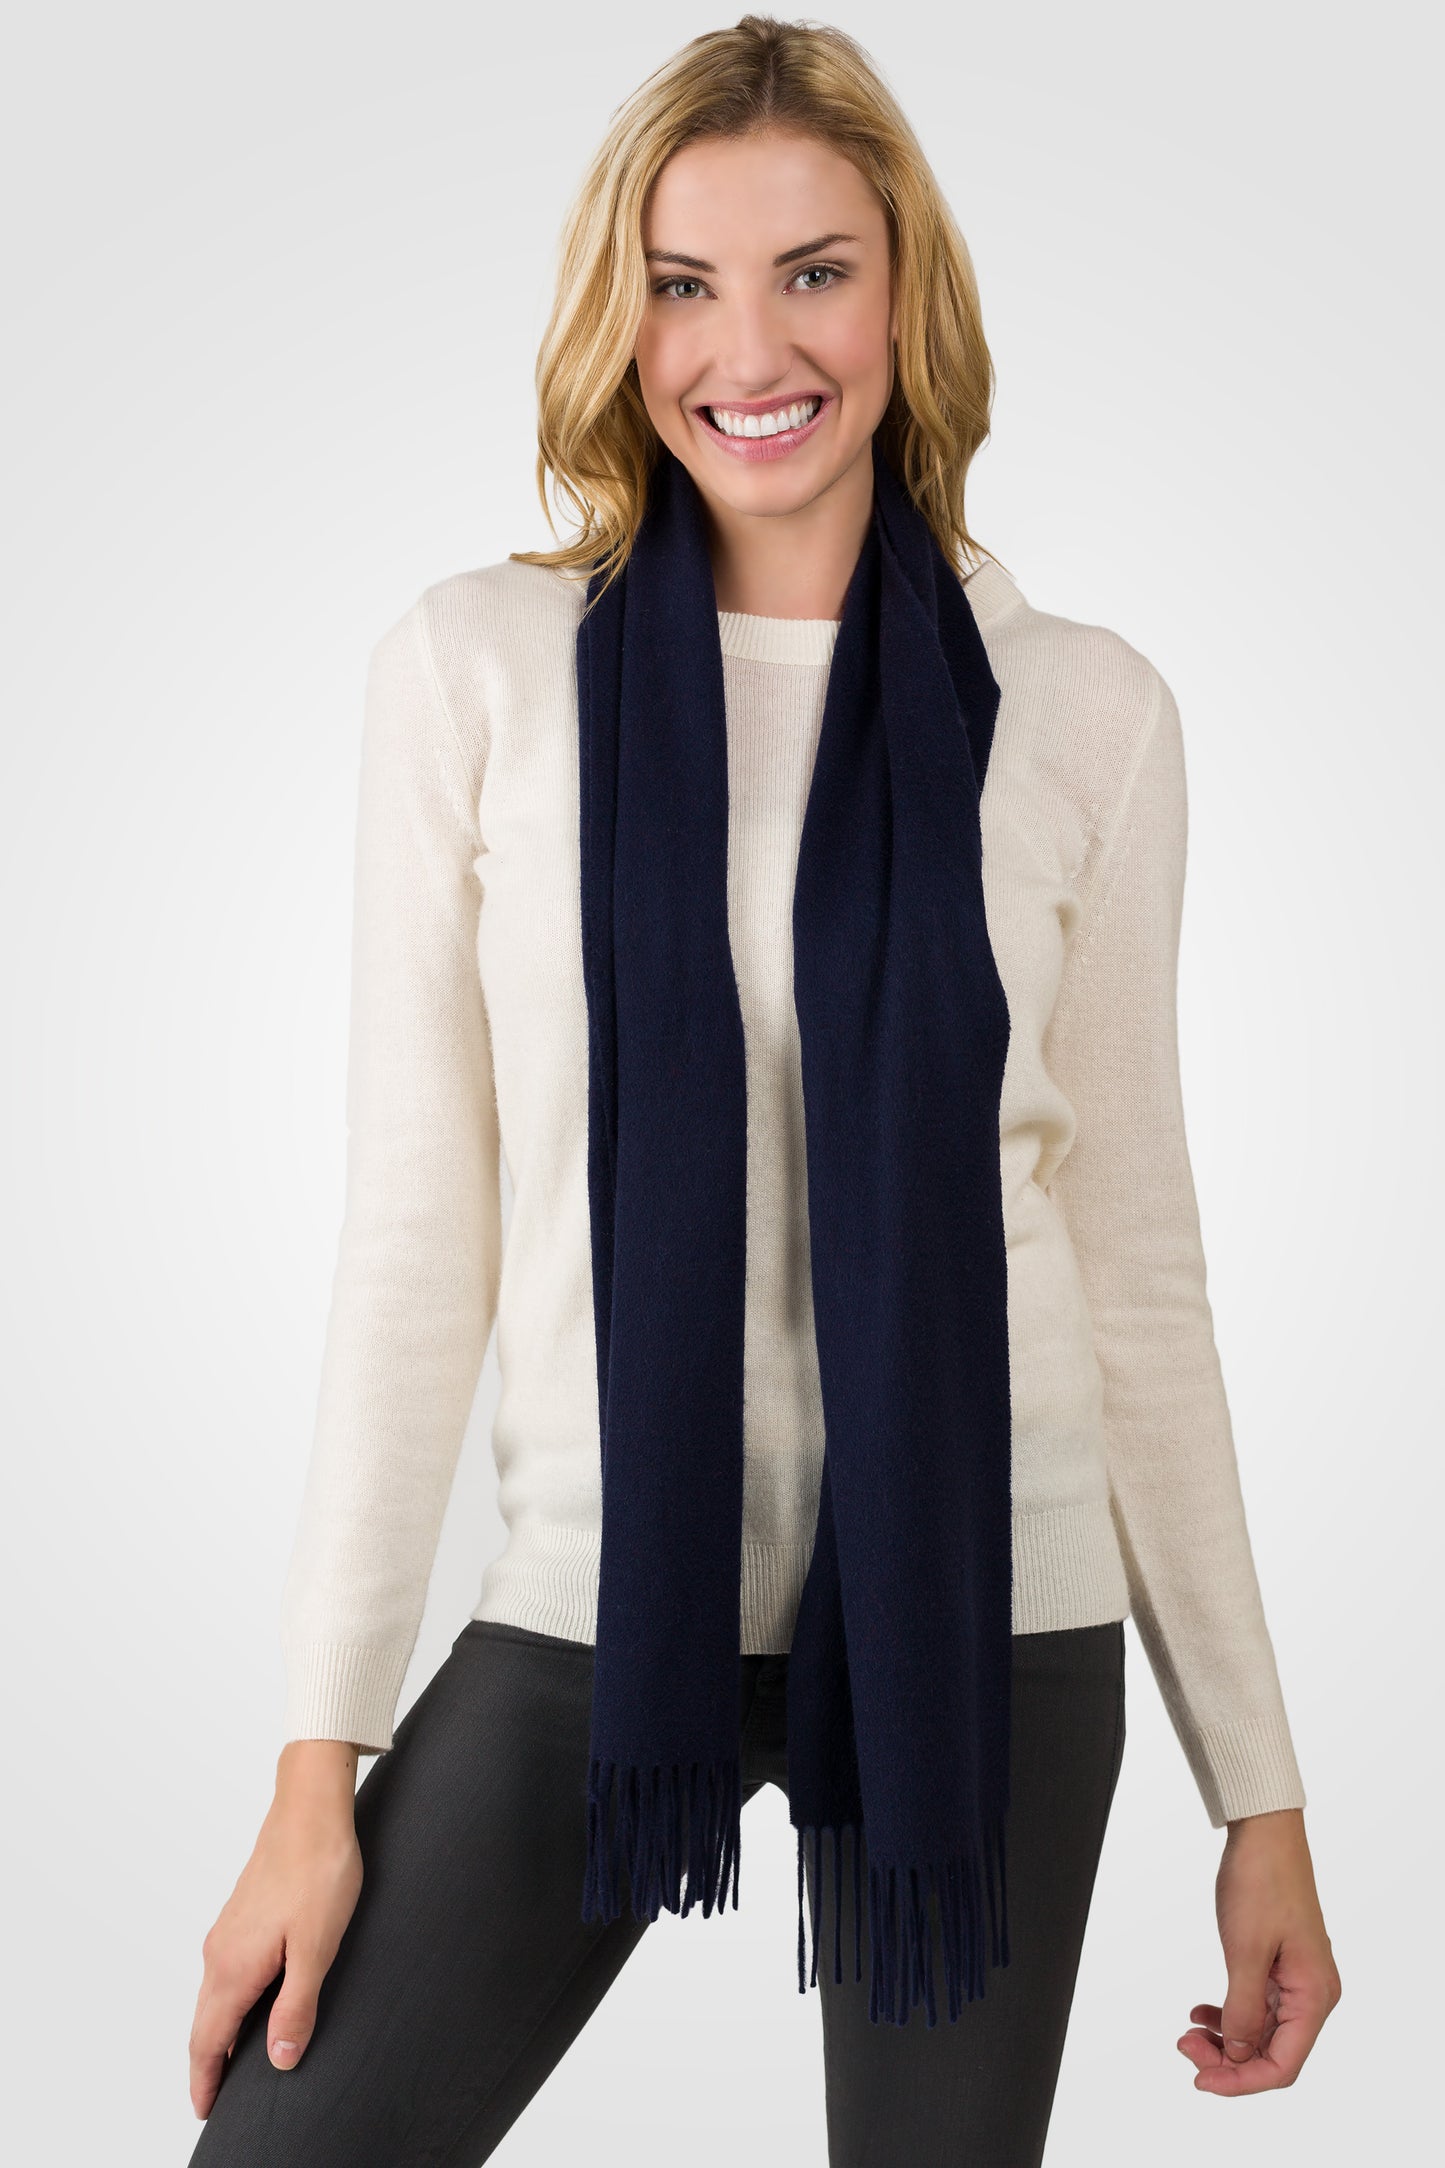 50% Cashmere 50% Merino Wool Woven Scarves 12"x62"